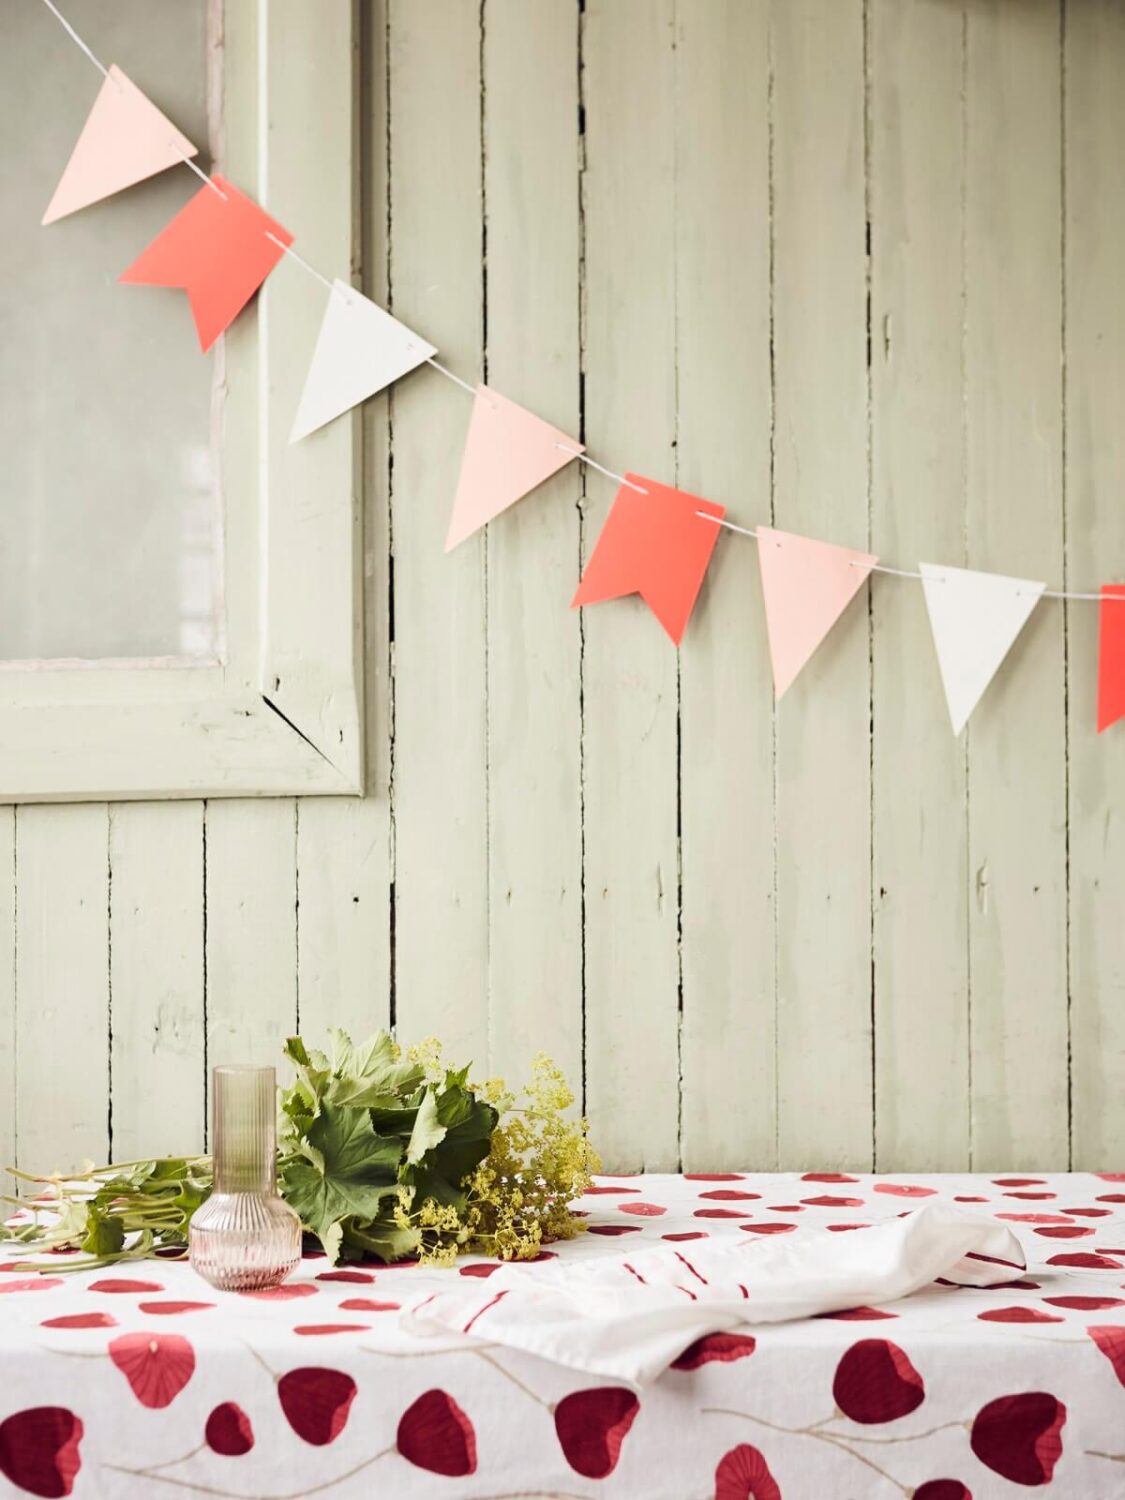 IKEA_ANLEDNING_decorations-april-news-nordroom